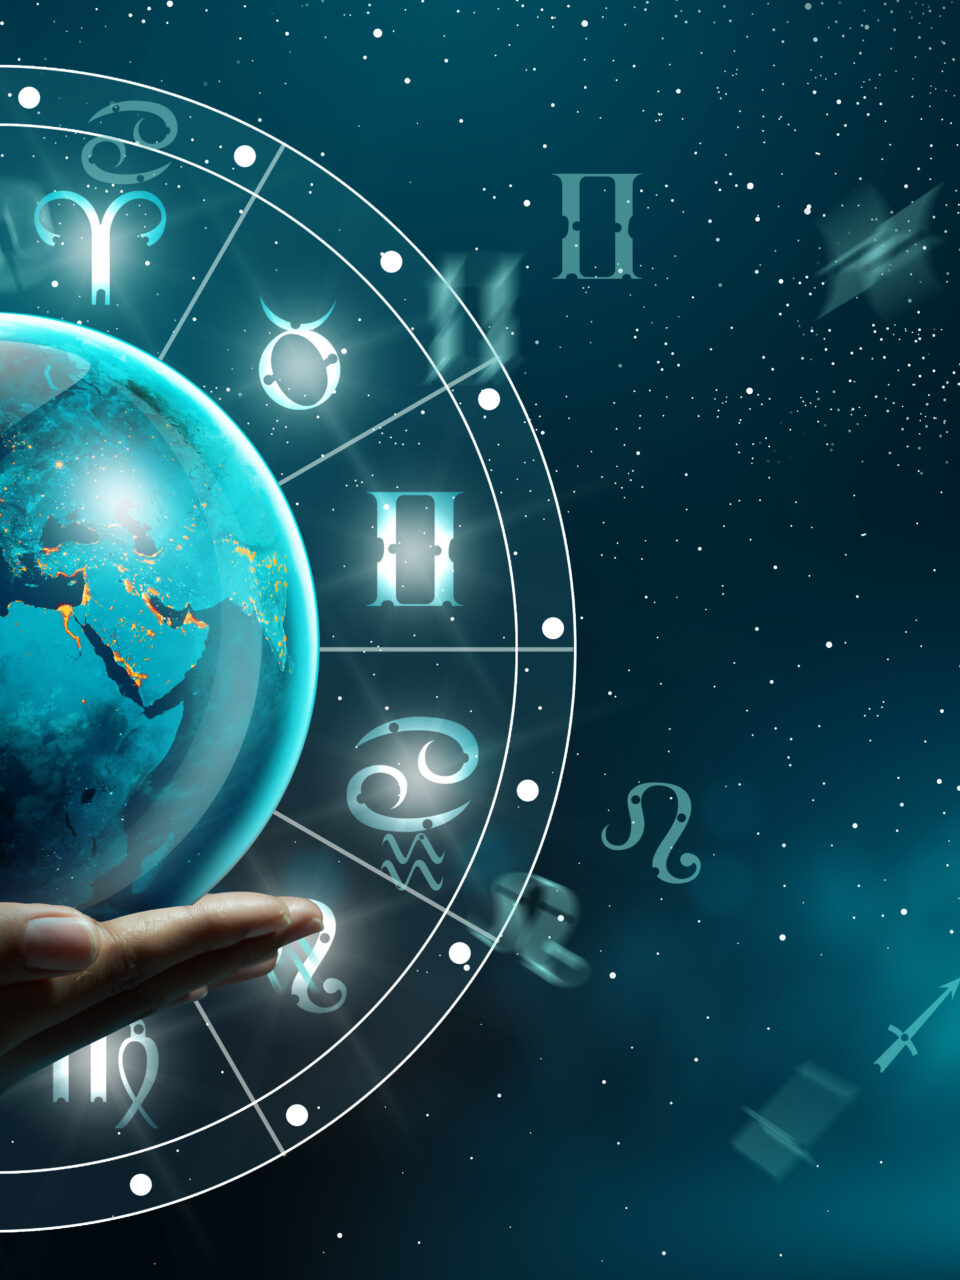 https://dmtreasure.com/wp-content/uploads/2023/02/astrological-zodiac-signs-inside-horoscope-with-planet-earth-hand-knowledge-stars-sky-power-universe-concept-elements-furnished-by-nasa-960x1280.jpg